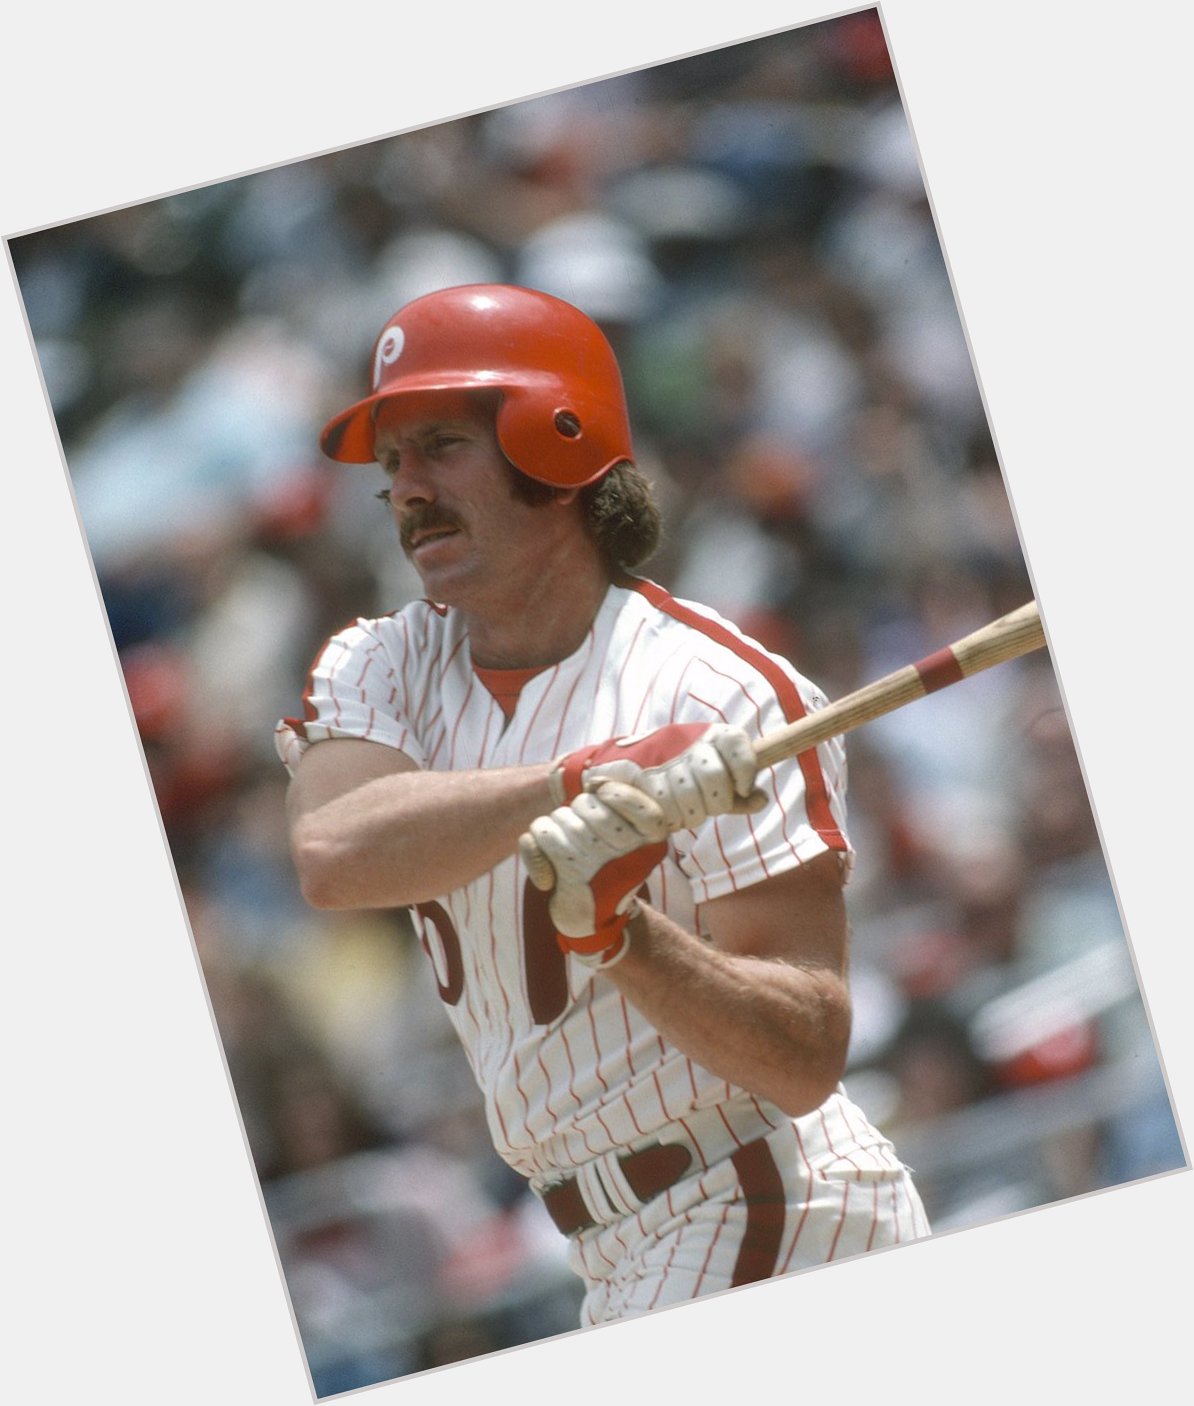 Happy 68th Birthday to former first/third baseman and Hall of Famer, Mike Schmidt!  